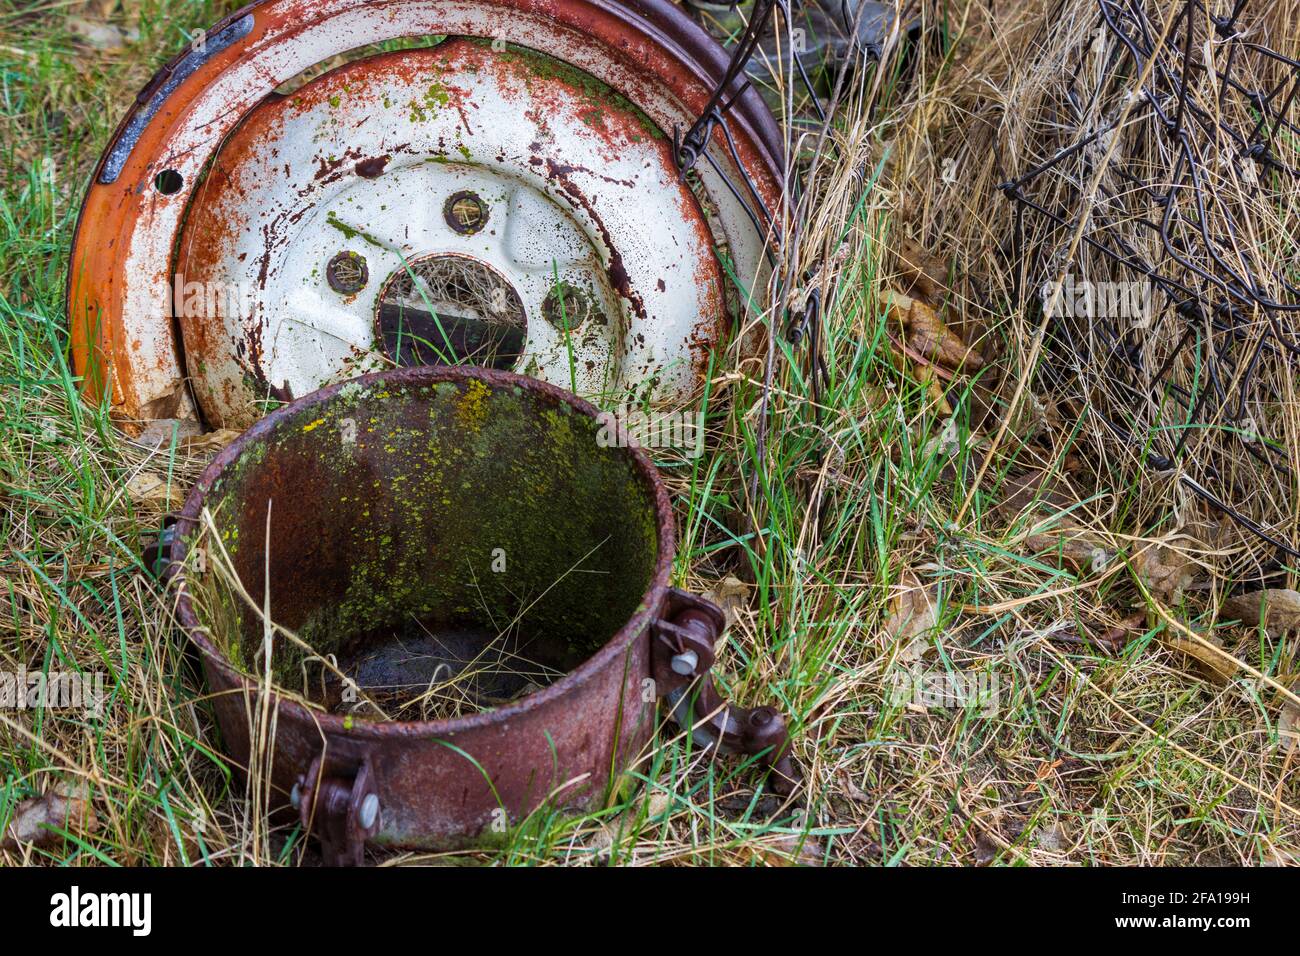 The canister from an antique paint sprayer, a metal rim and a roll of old wire protrude from spring rain dampened green grass. Stock Photo